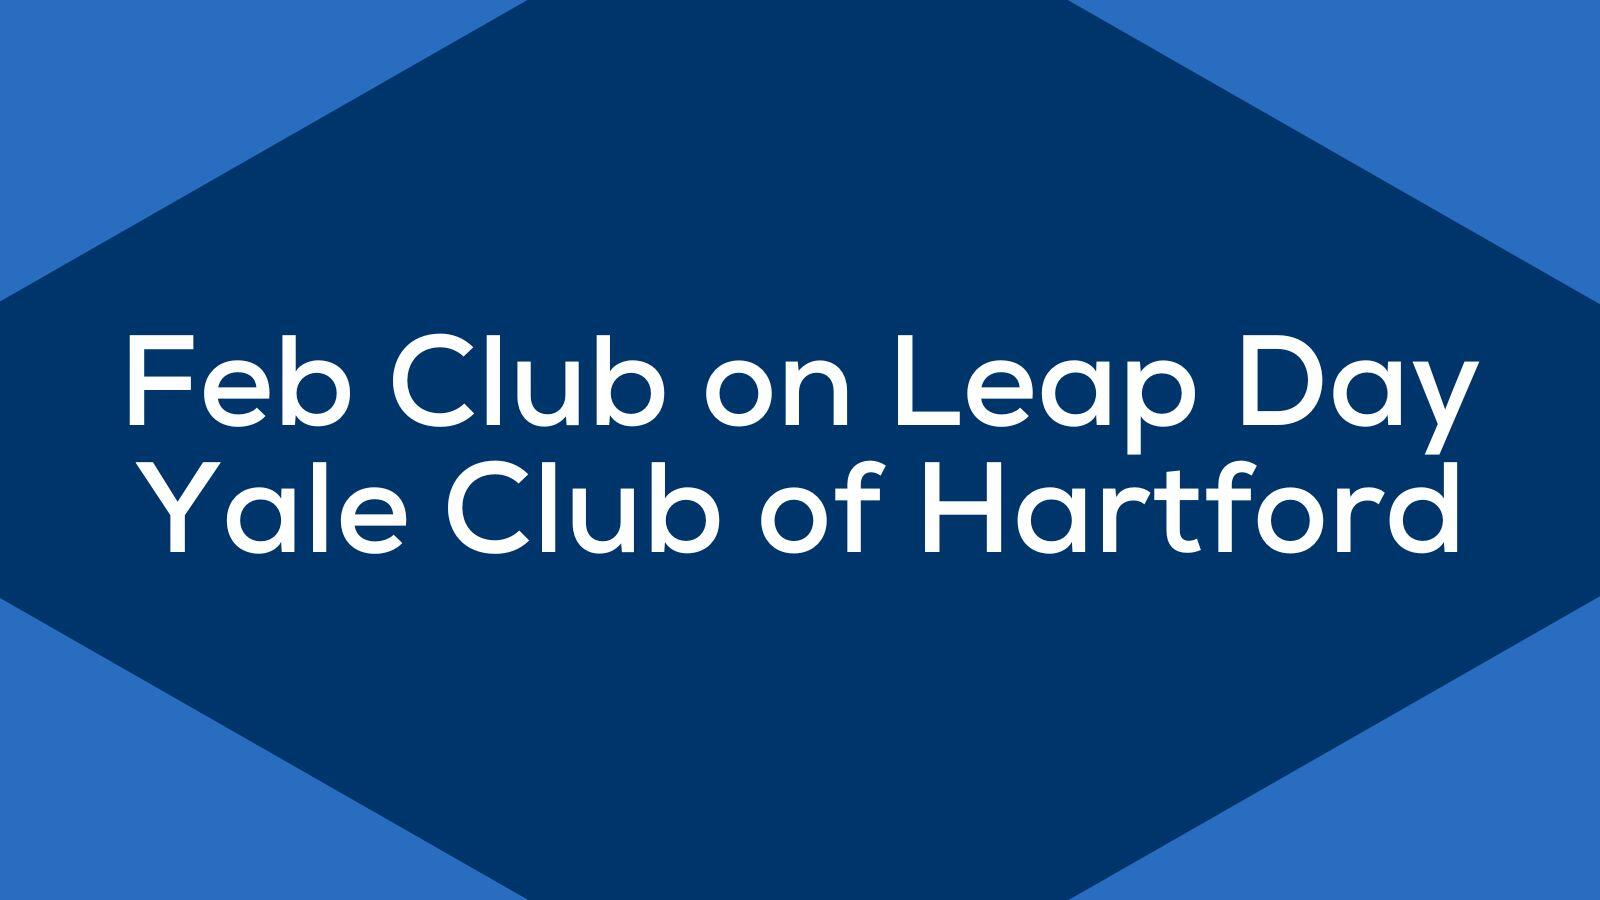 Feb Club on Leap Day with the Yale Club of Hartford